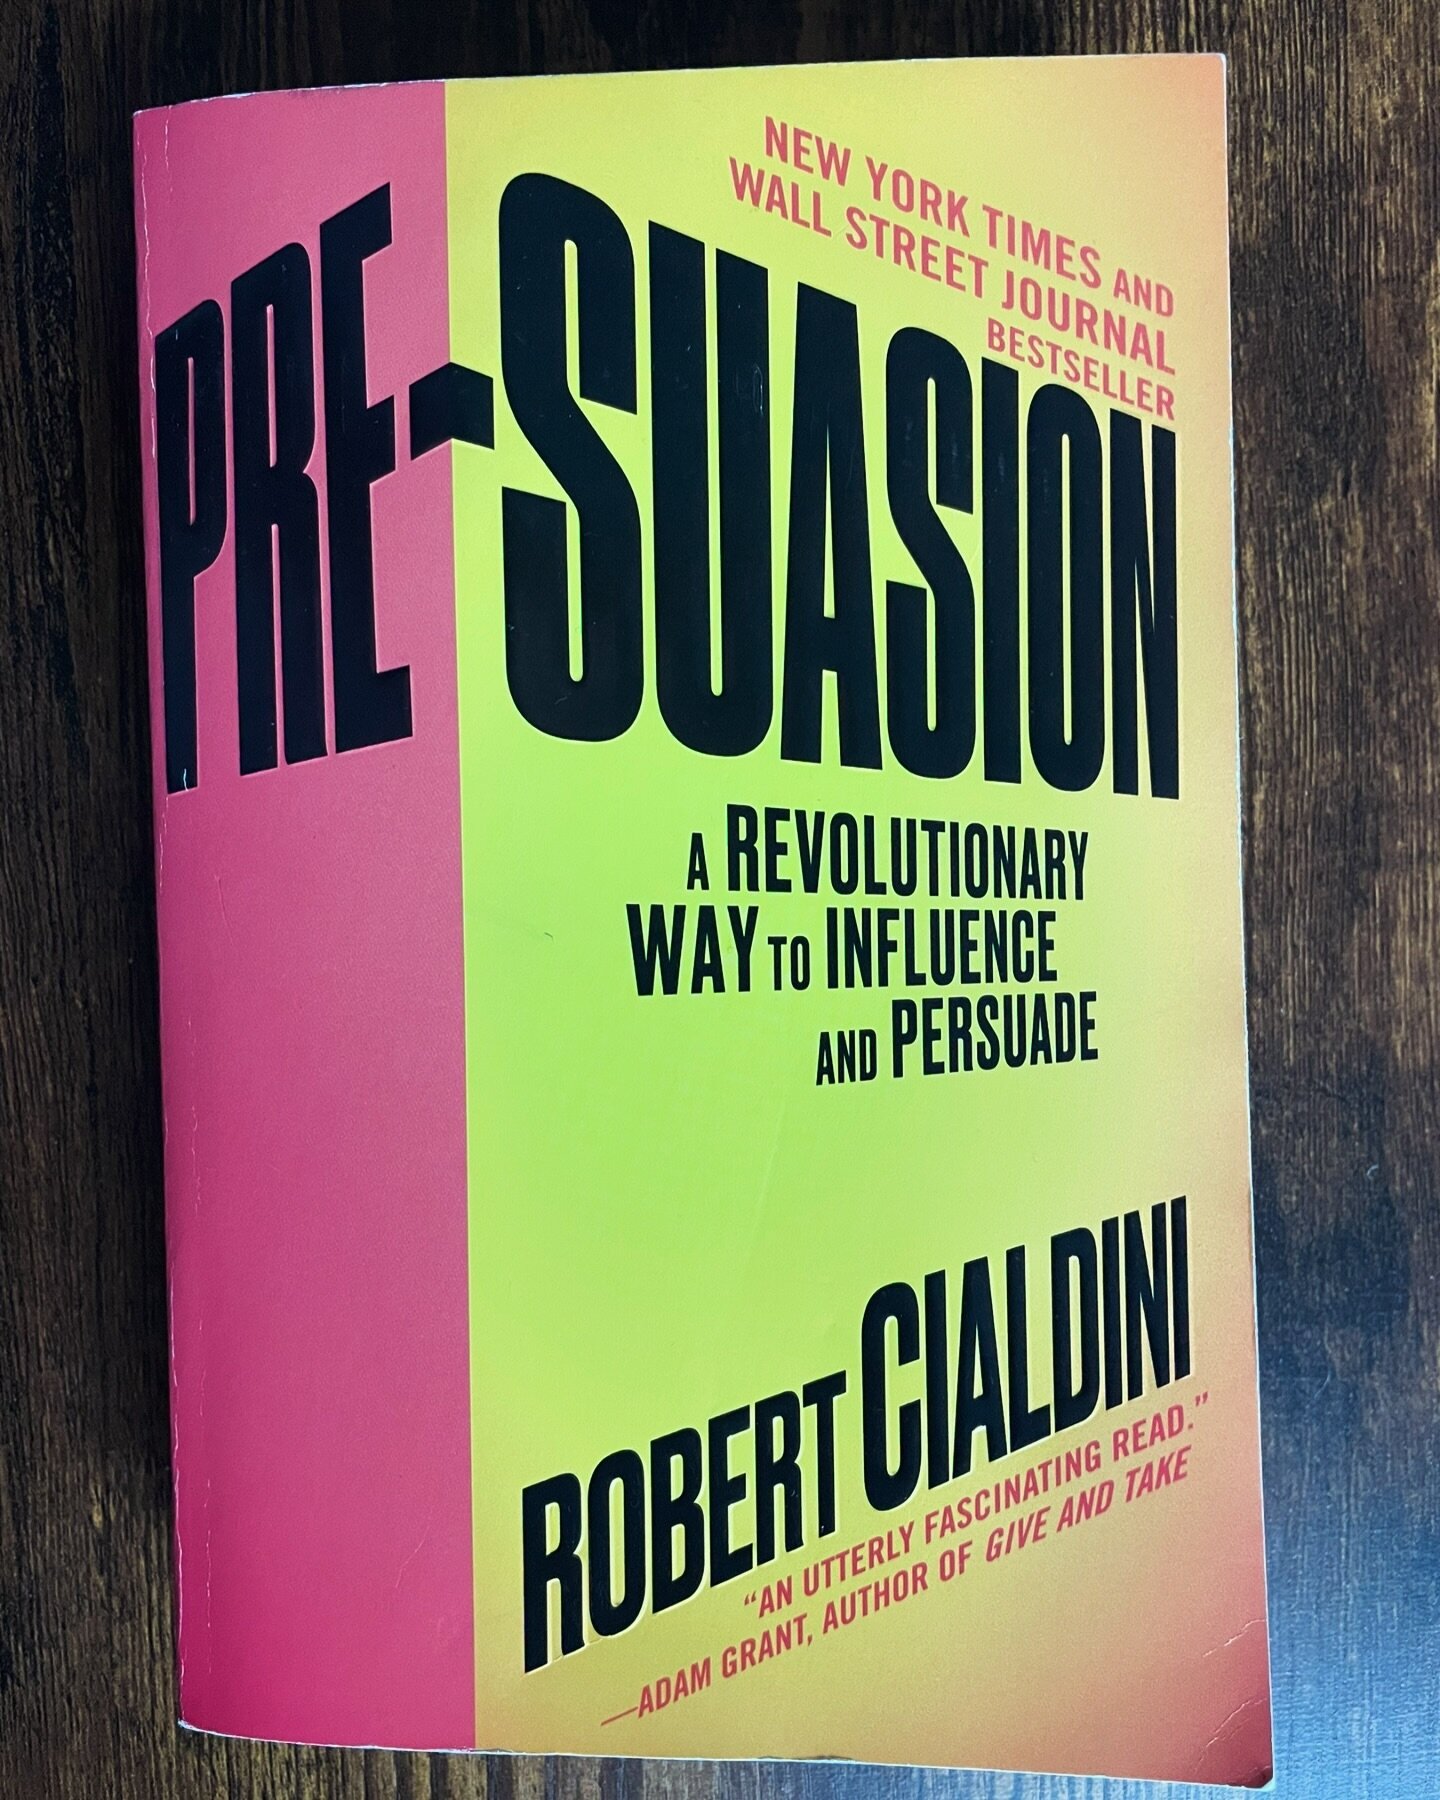 I read sections of Pre-Suasion by Robert Cialdini four years ago. Decided to go back and read the whole thing. Glad I did. Lots of interesting nuggets.

&hellip;
#pre-suasion #robertcialdini #amreading #books #bookstagram #influence #communication